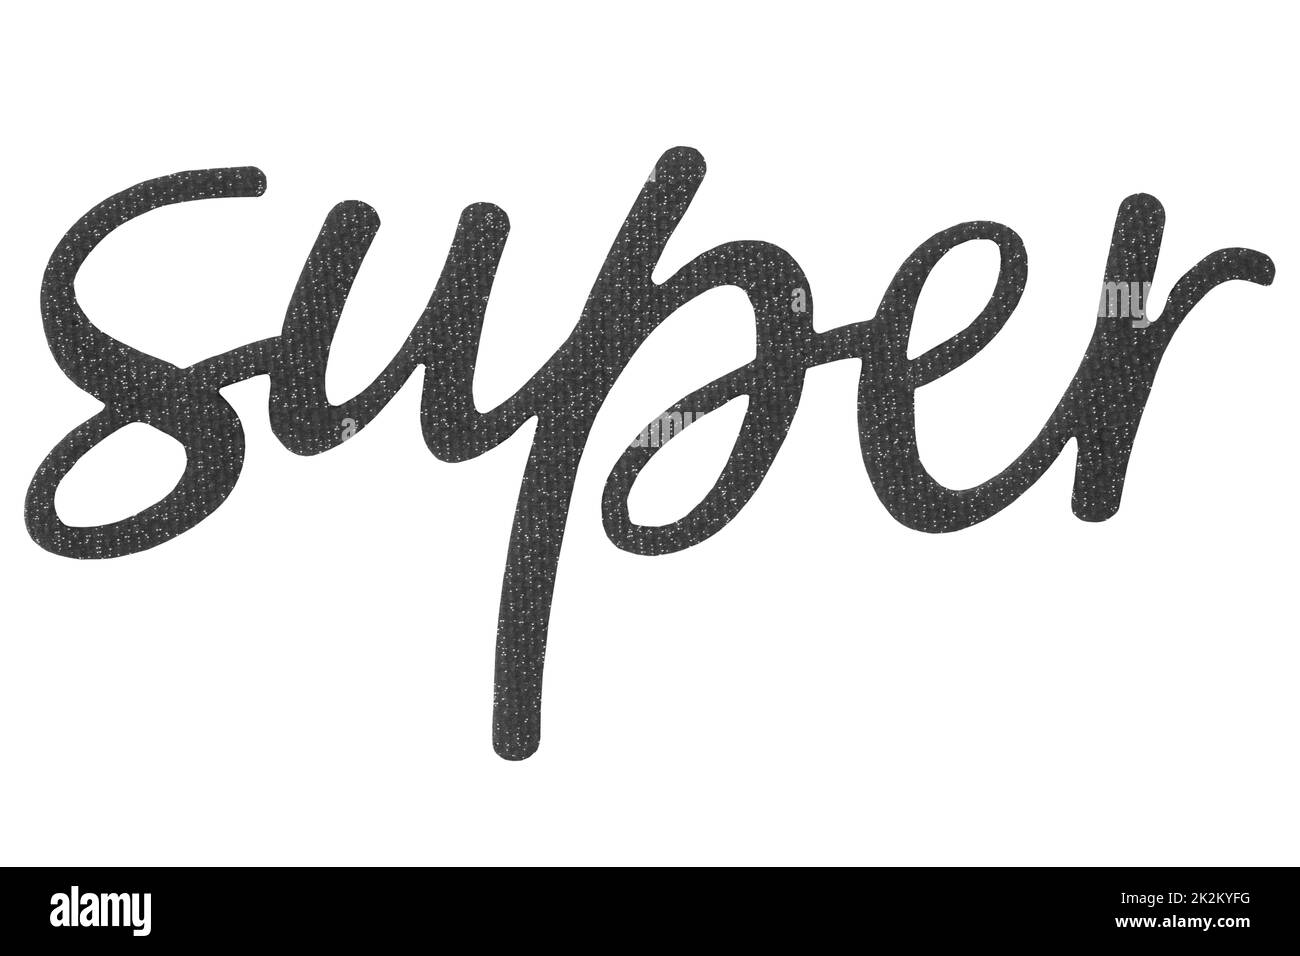 Closeup of the word "Super" in black color made of paper and fabric isolated on a white background. Clipping path. Stock Photo